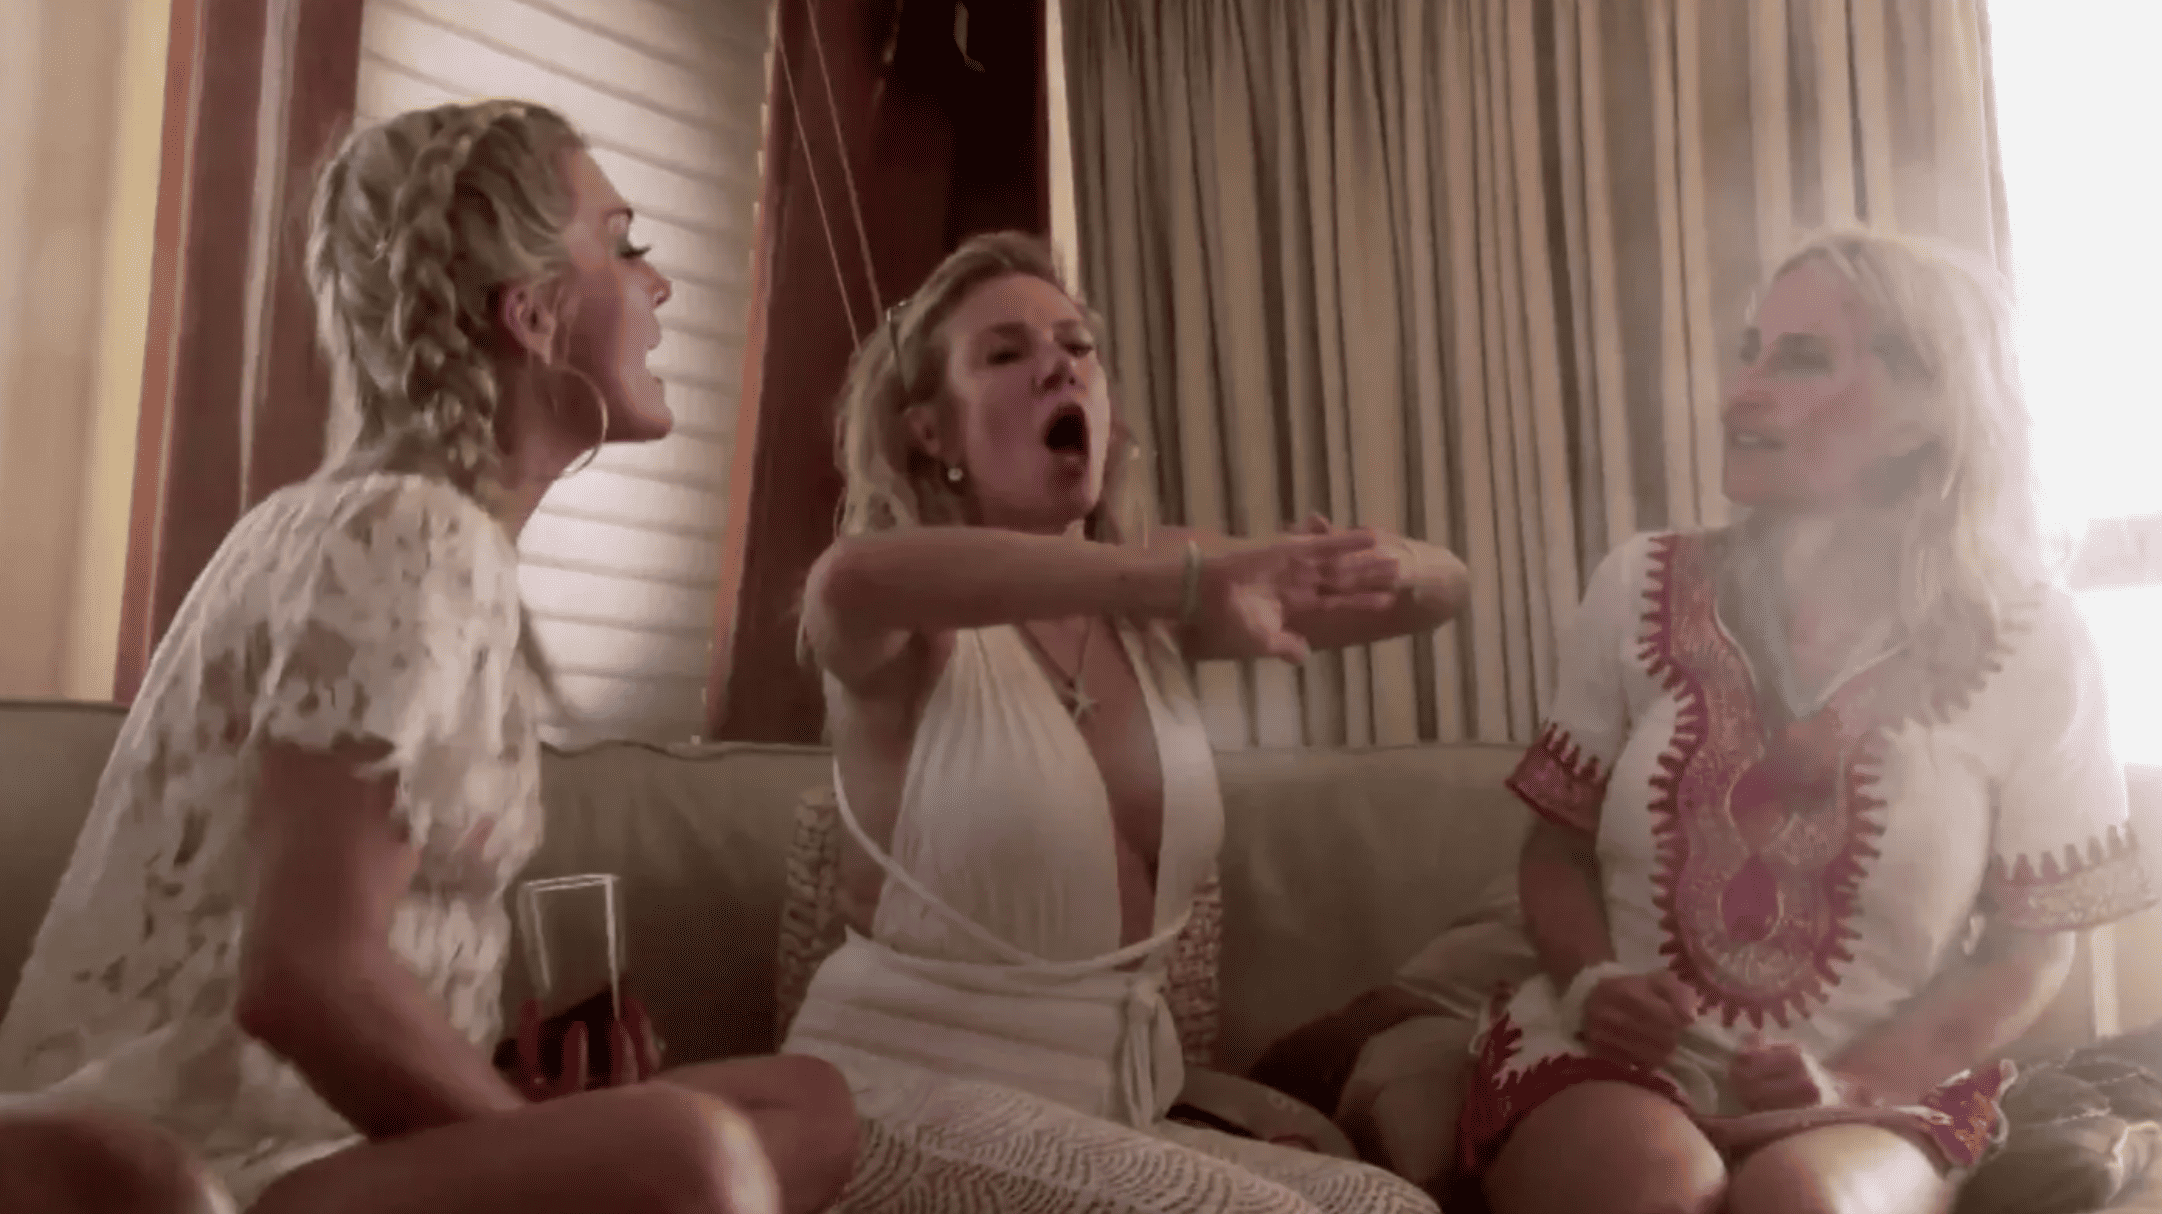 Three women fight while seated in the main salon of a motor yacht in this image from Shed Media.